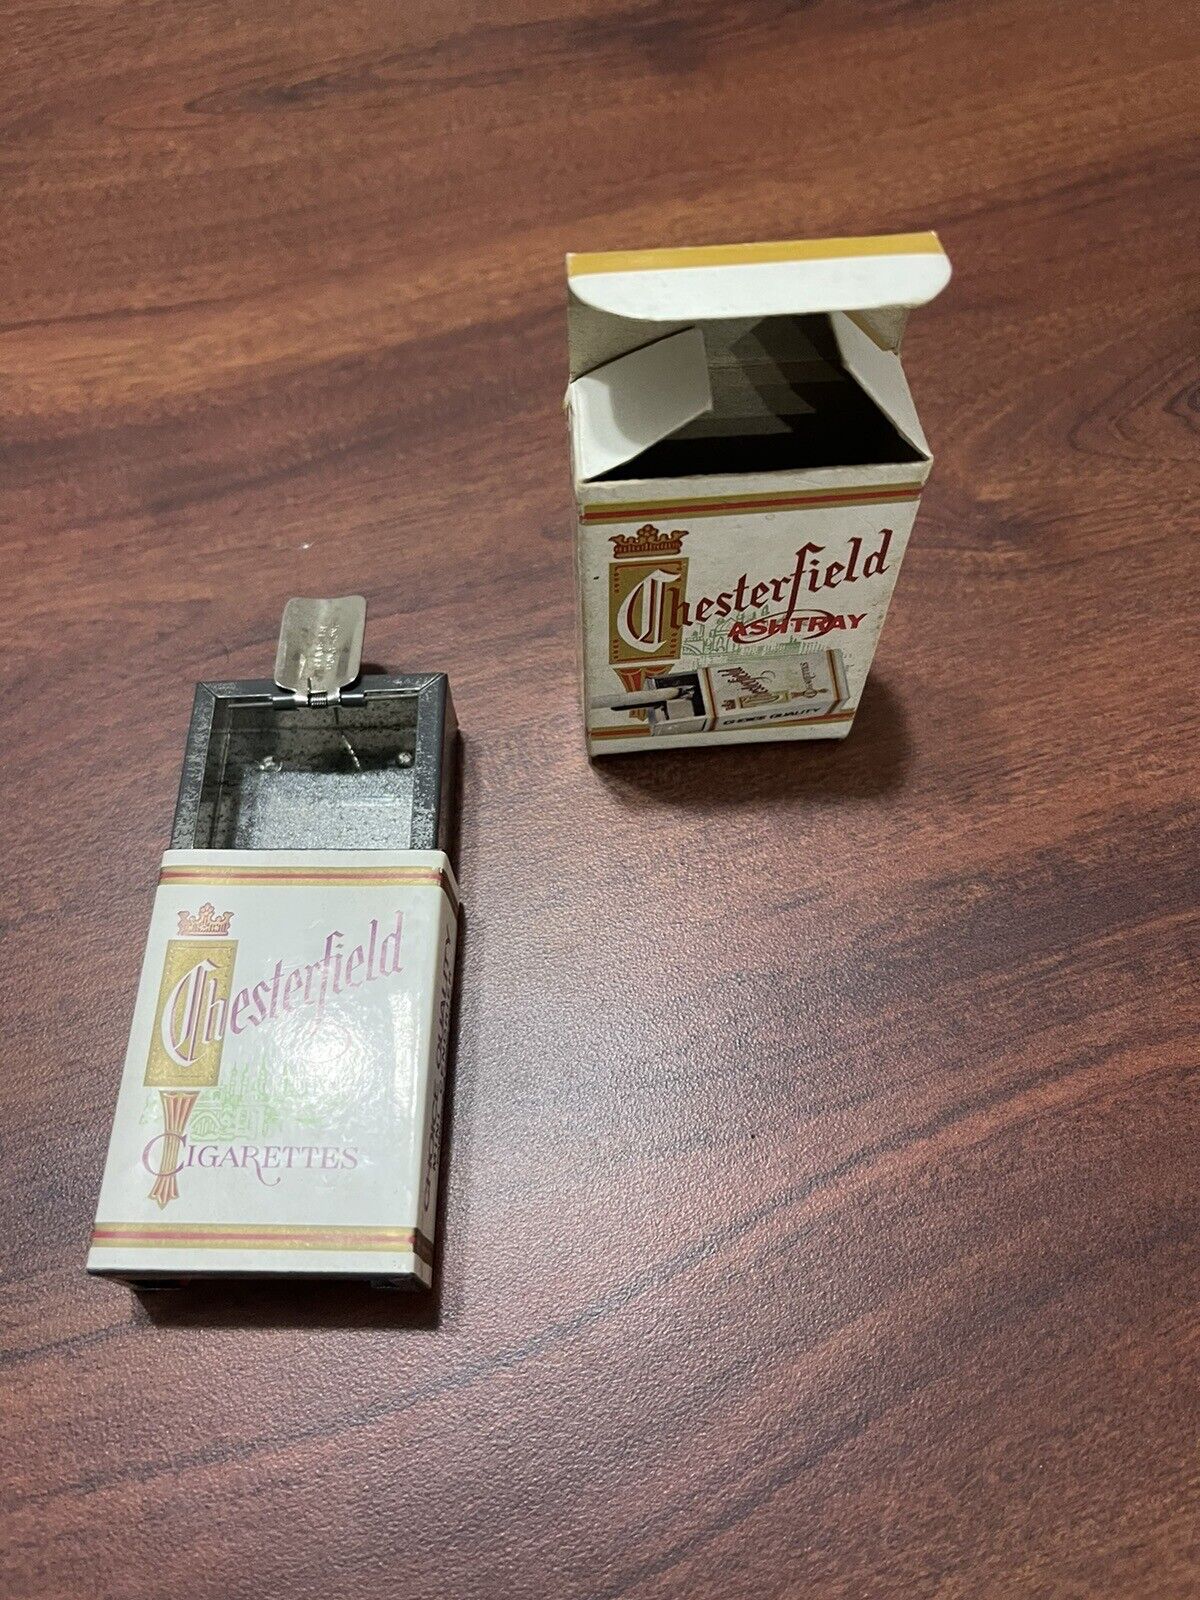 Vintage Chesterfield Ashtray With Box. NEAR MINT UNUSED. Real Clean Cond.